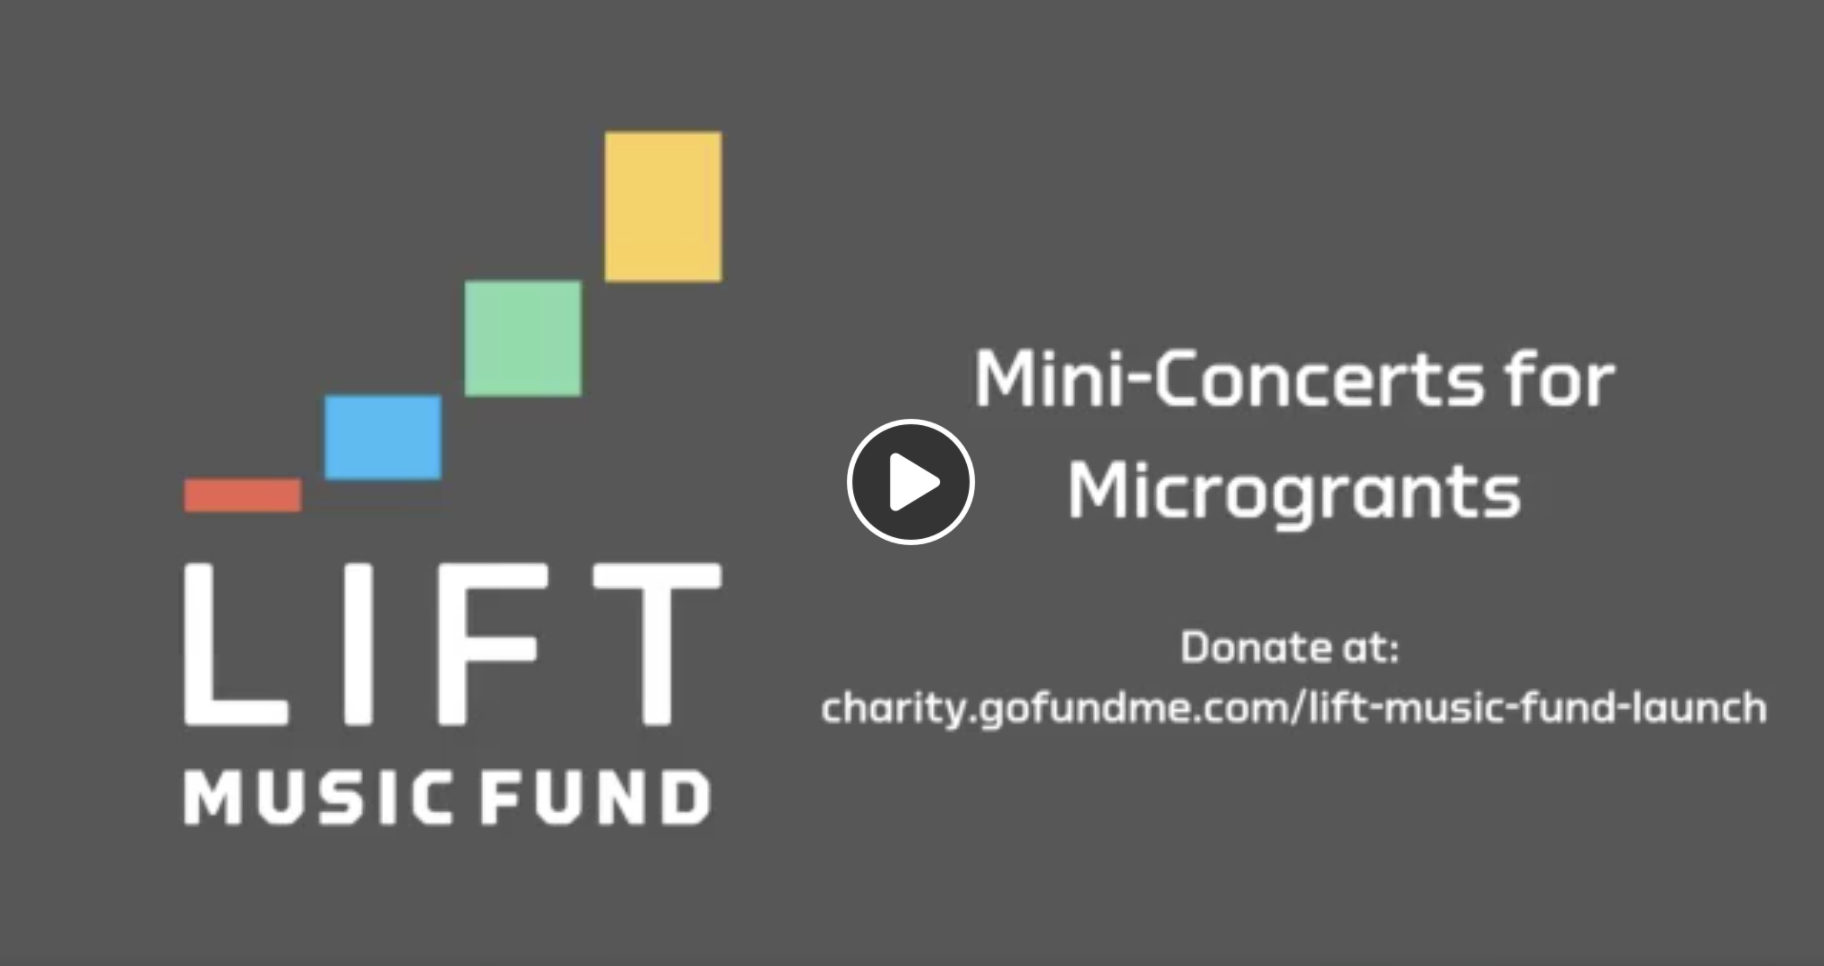 Lift Music Fund mini-concerts for microgrants